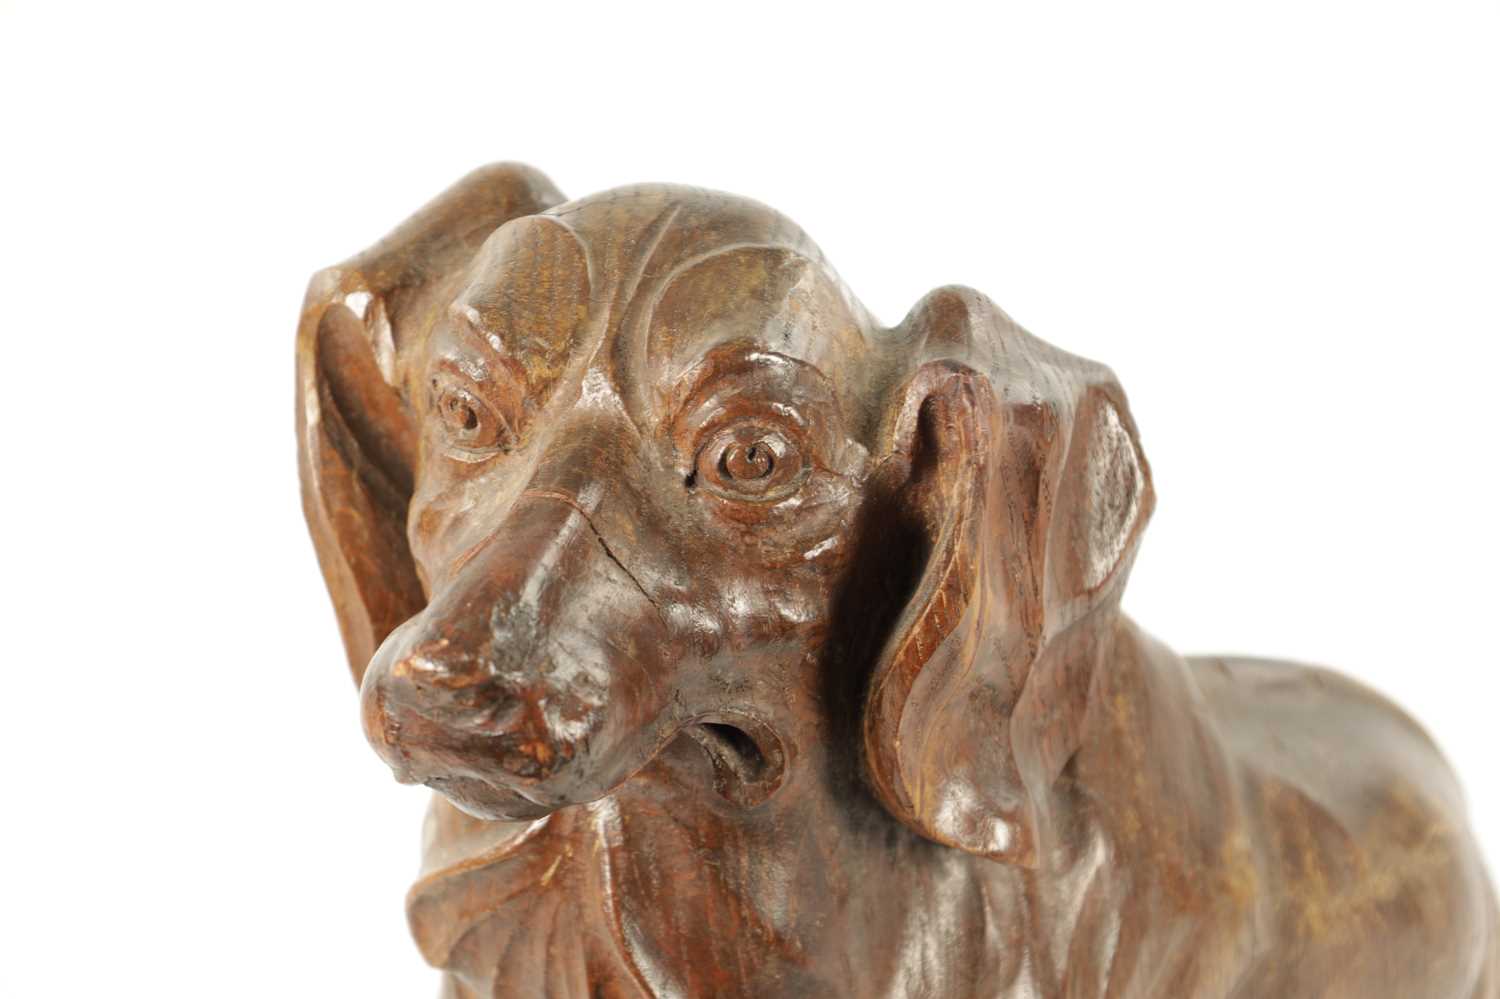 AN EARLY 20TH CENTURY ‘MOUSEMAN’ STYLE CARVED OAK SCULPTURE - Image 3 of 6